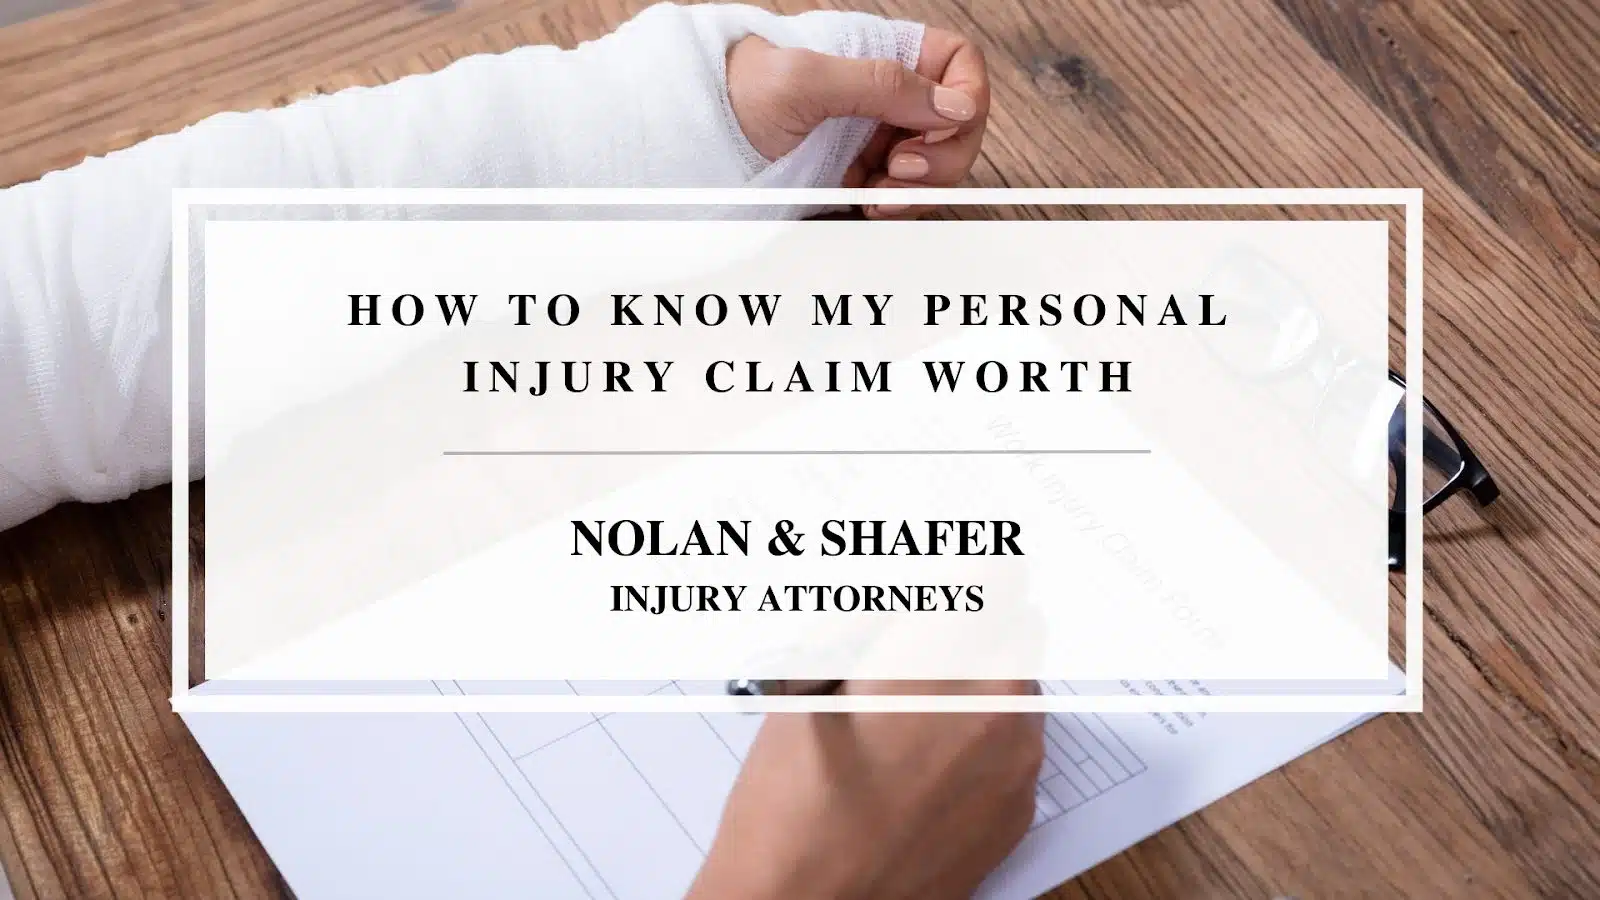 Featured image of how to know my personal injury claim worth